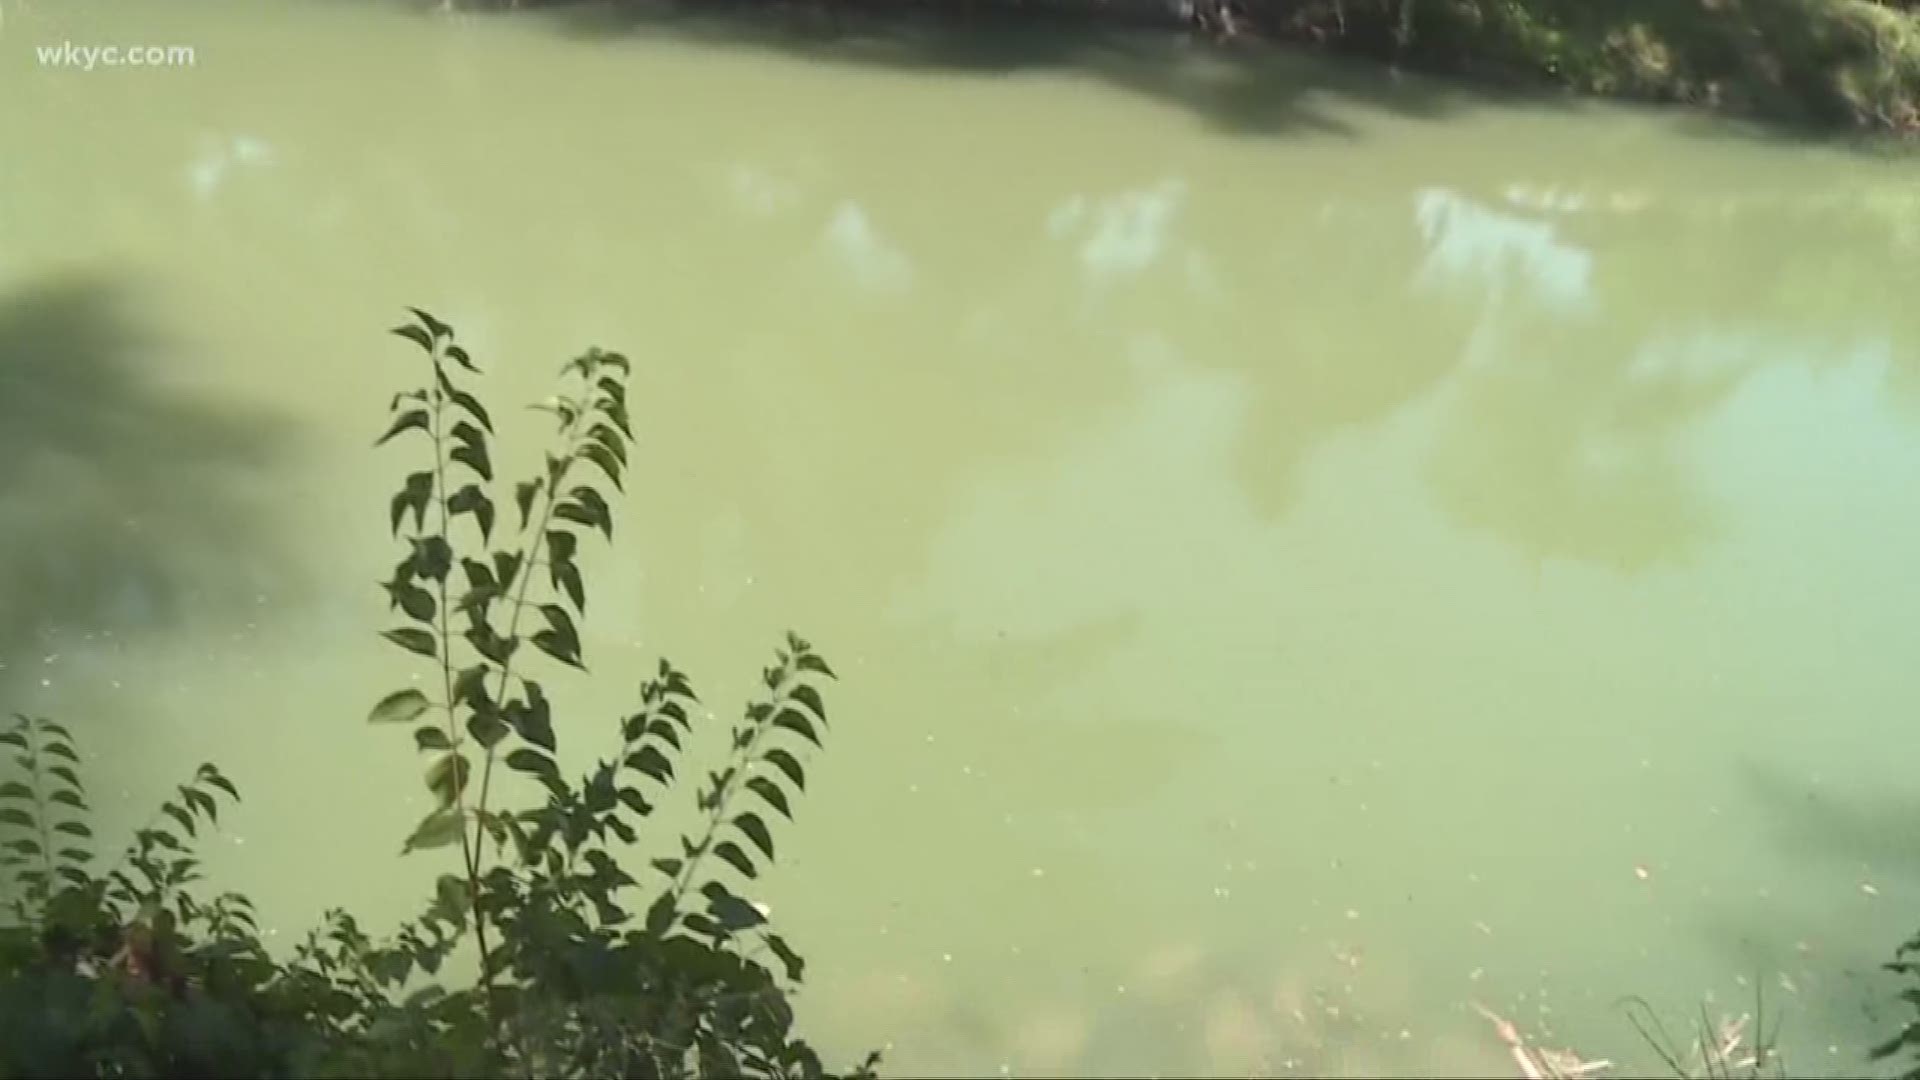 In a number of states people have reported their pets becoming sick or dying after coming in contact with blue green algae in lakes or ponds.  The algae blooms are common in the hot mid to late summer months in nutrient rich water.